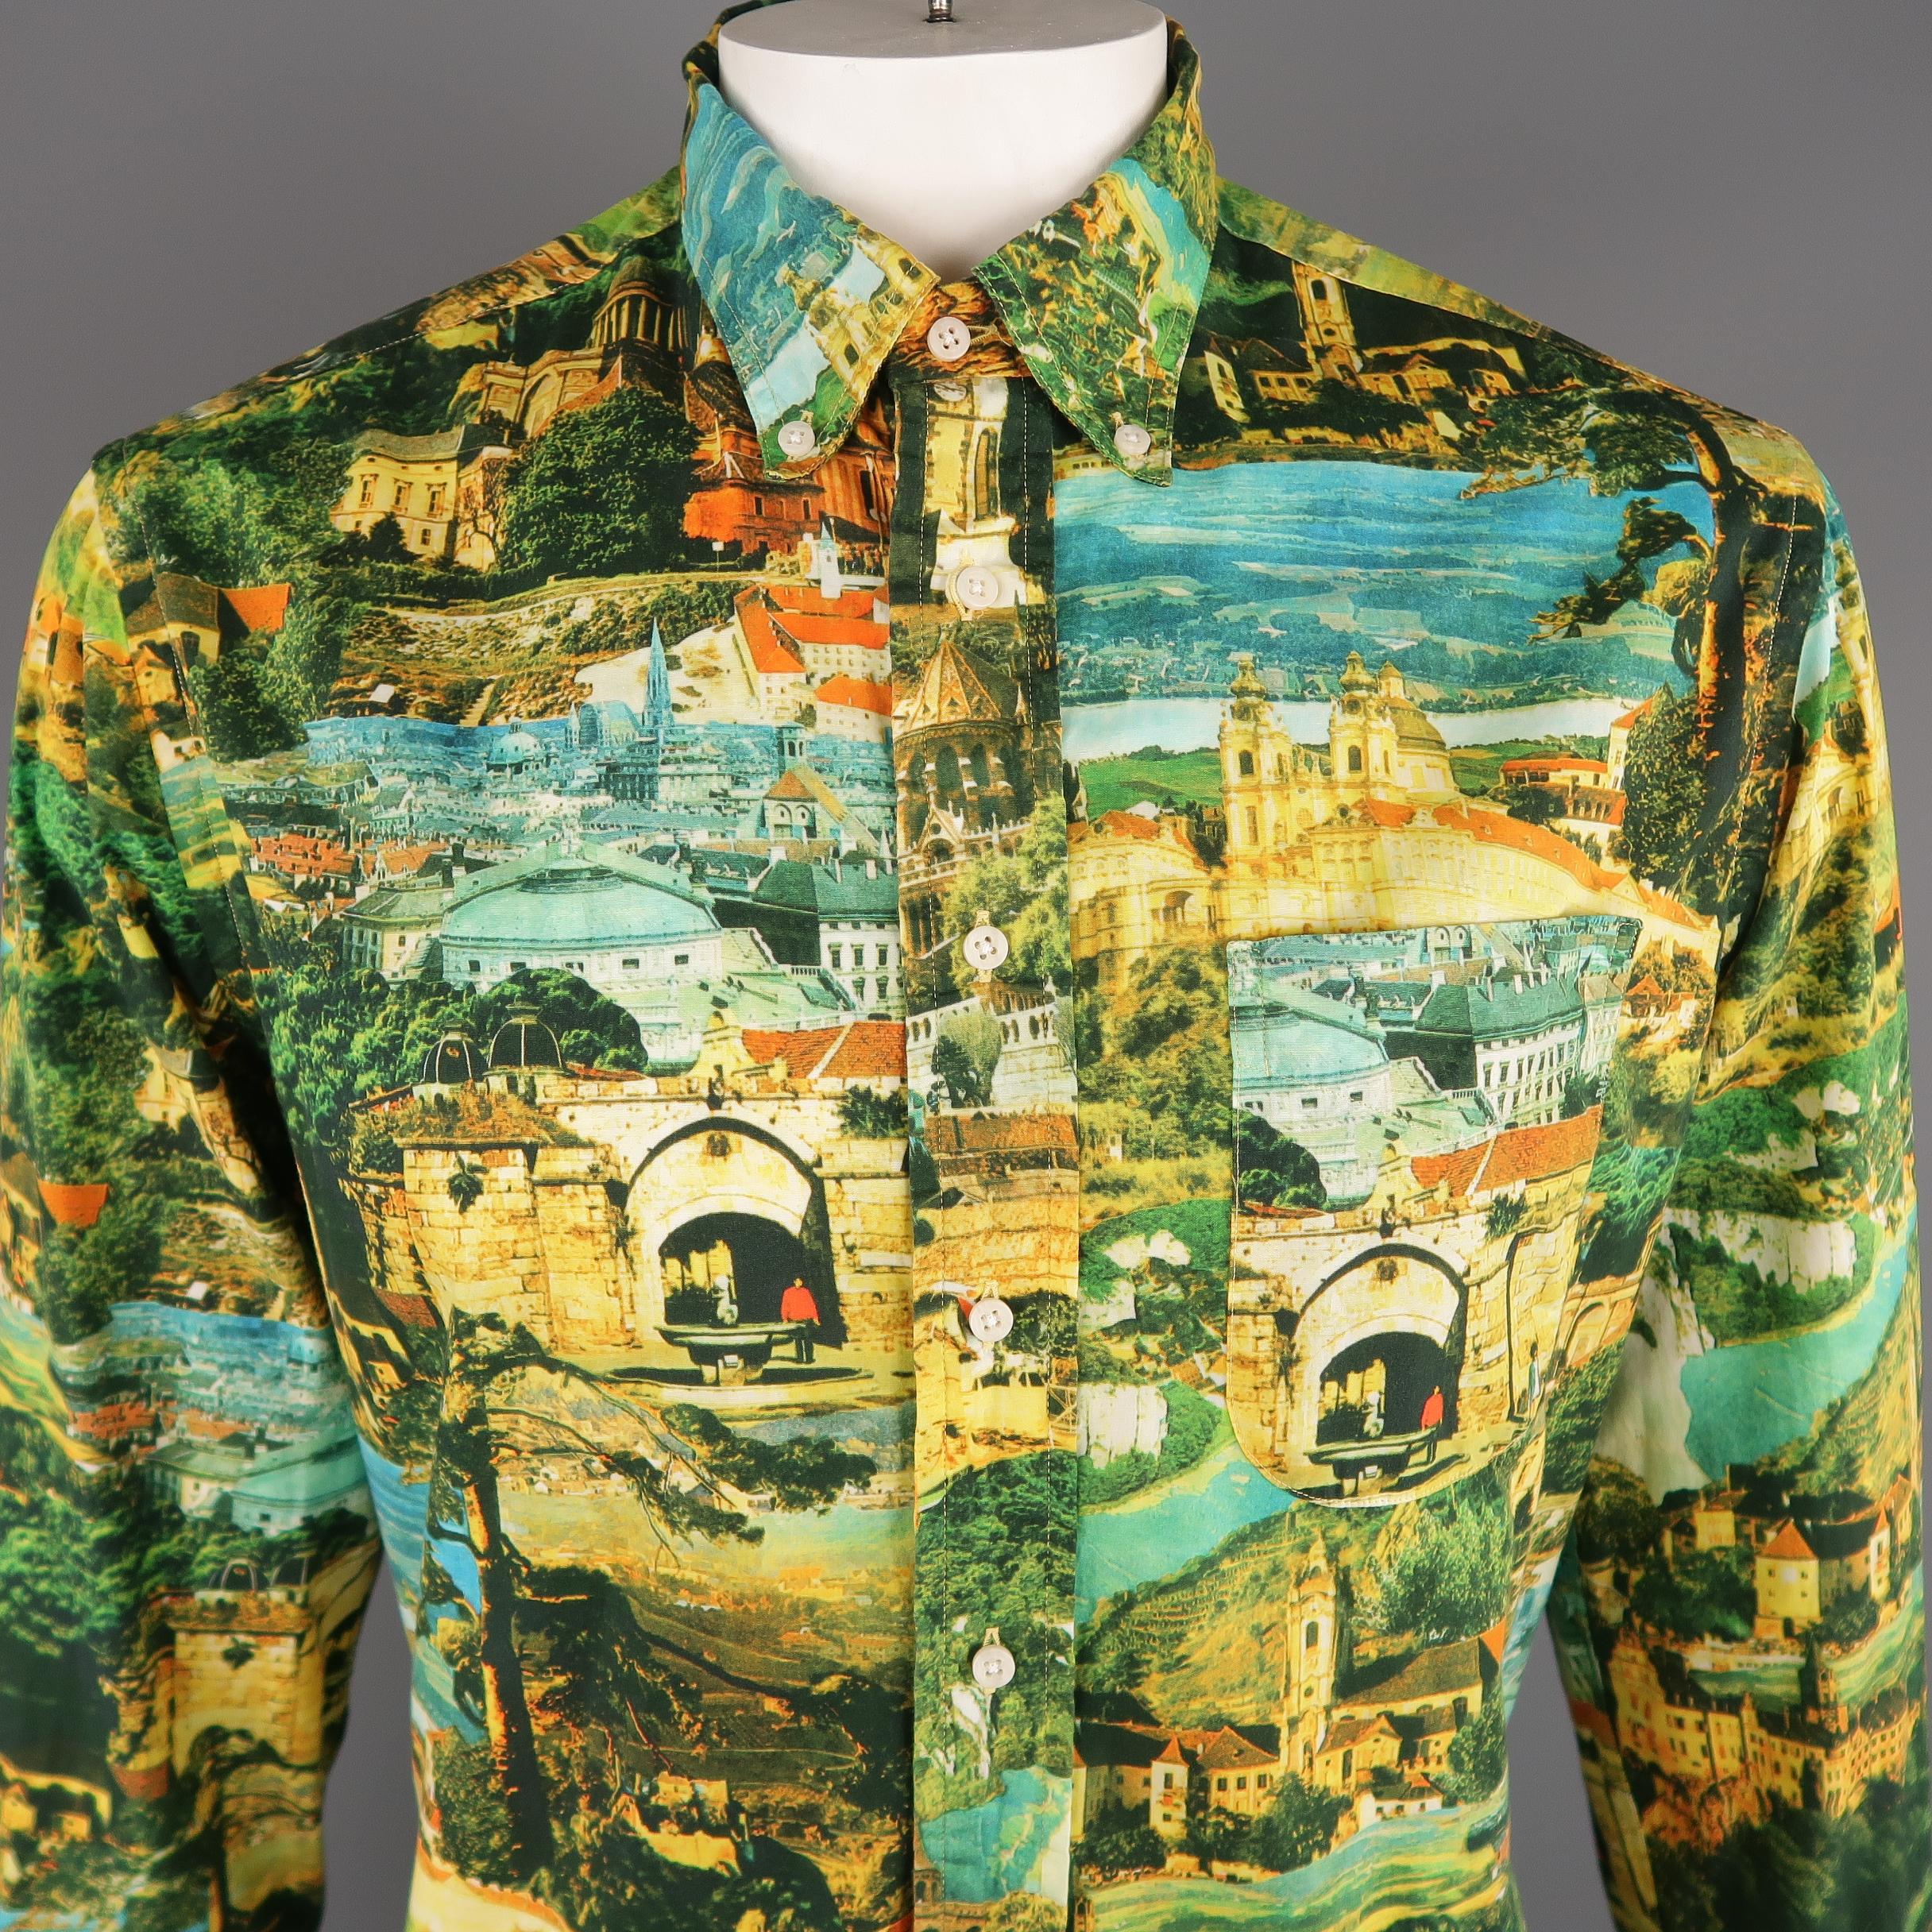 GITMAN VINTAGE long sleeve shirt come in multi-color cotton with a postcard print, front pocket and button down. Made in USA.
 
Excellent Pre-Owned Condition.
Marked: L
 
Measurements:
 
Shoulder: 19 in.
Chest: 50 in.
Sleeve: 26 in.
Length: 32 in.